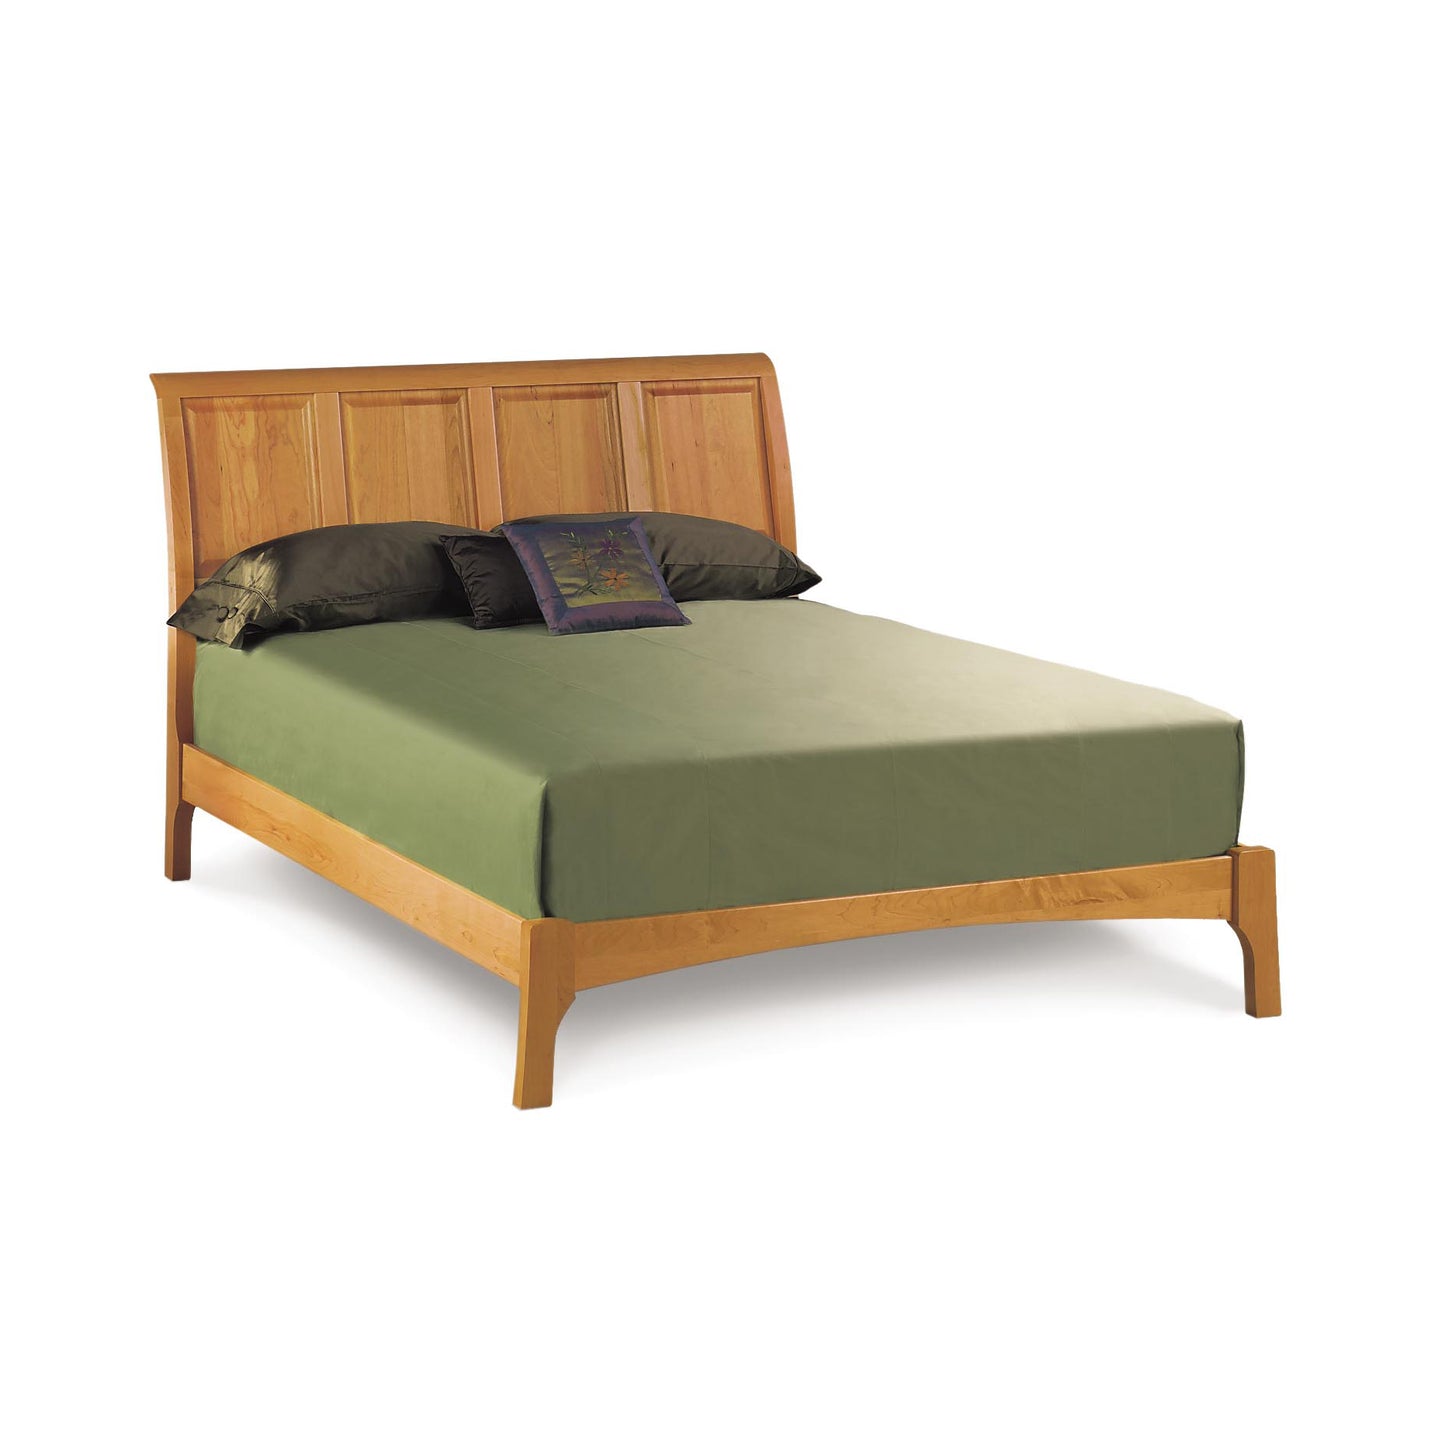 A solid Sarah Low Footboard Sleigh Bed queen-size platform bed with a green bedspread and black pillows against a white background. Brand Name: Copeland Furniture